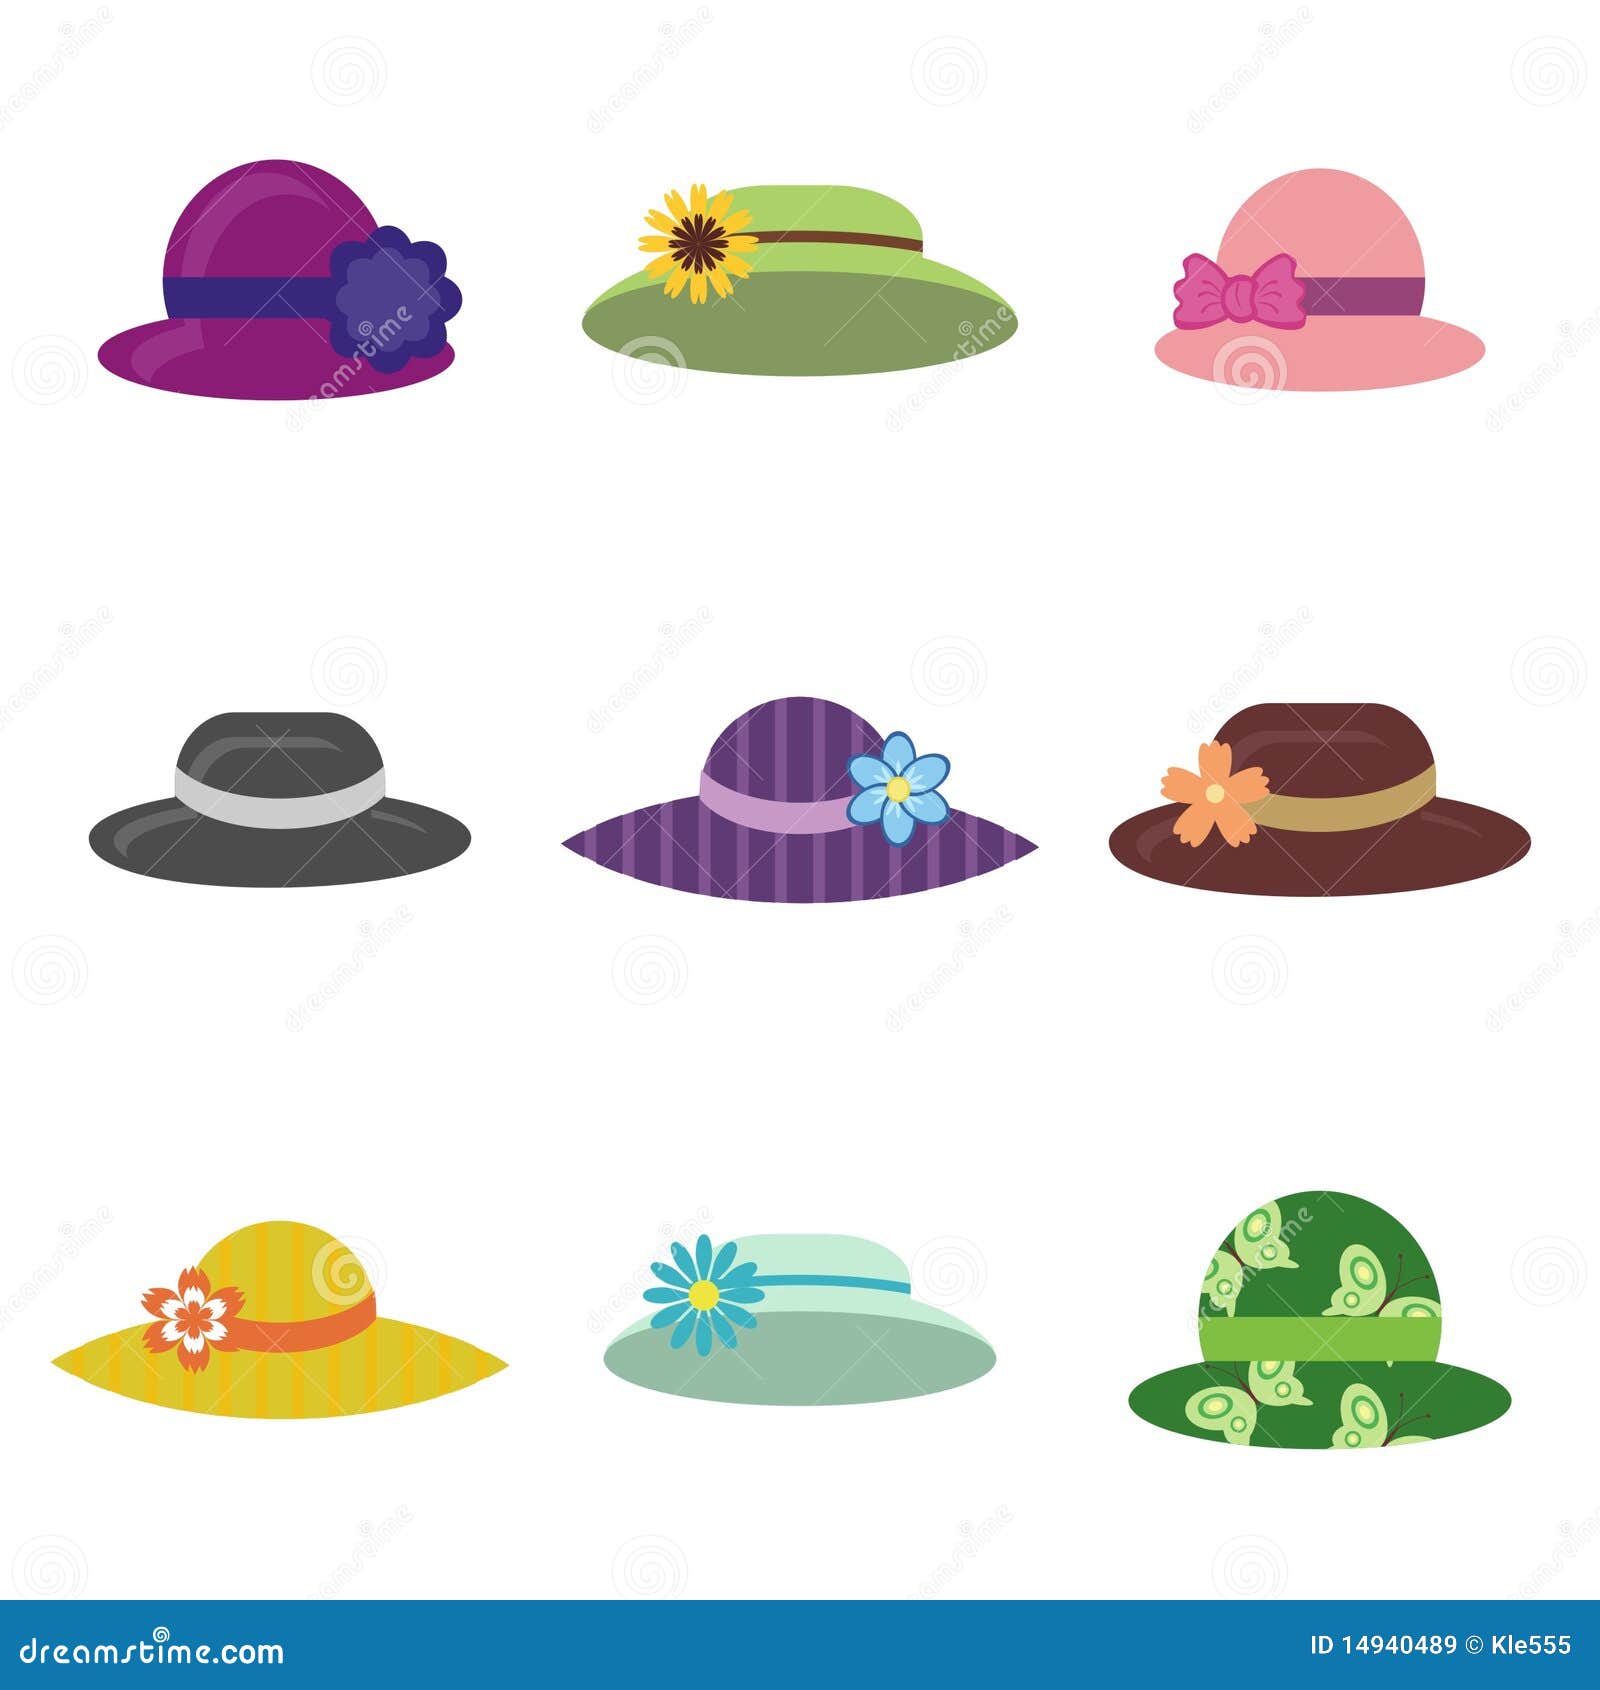 Set with hats stock illustration. Illustration of vector - 14940489